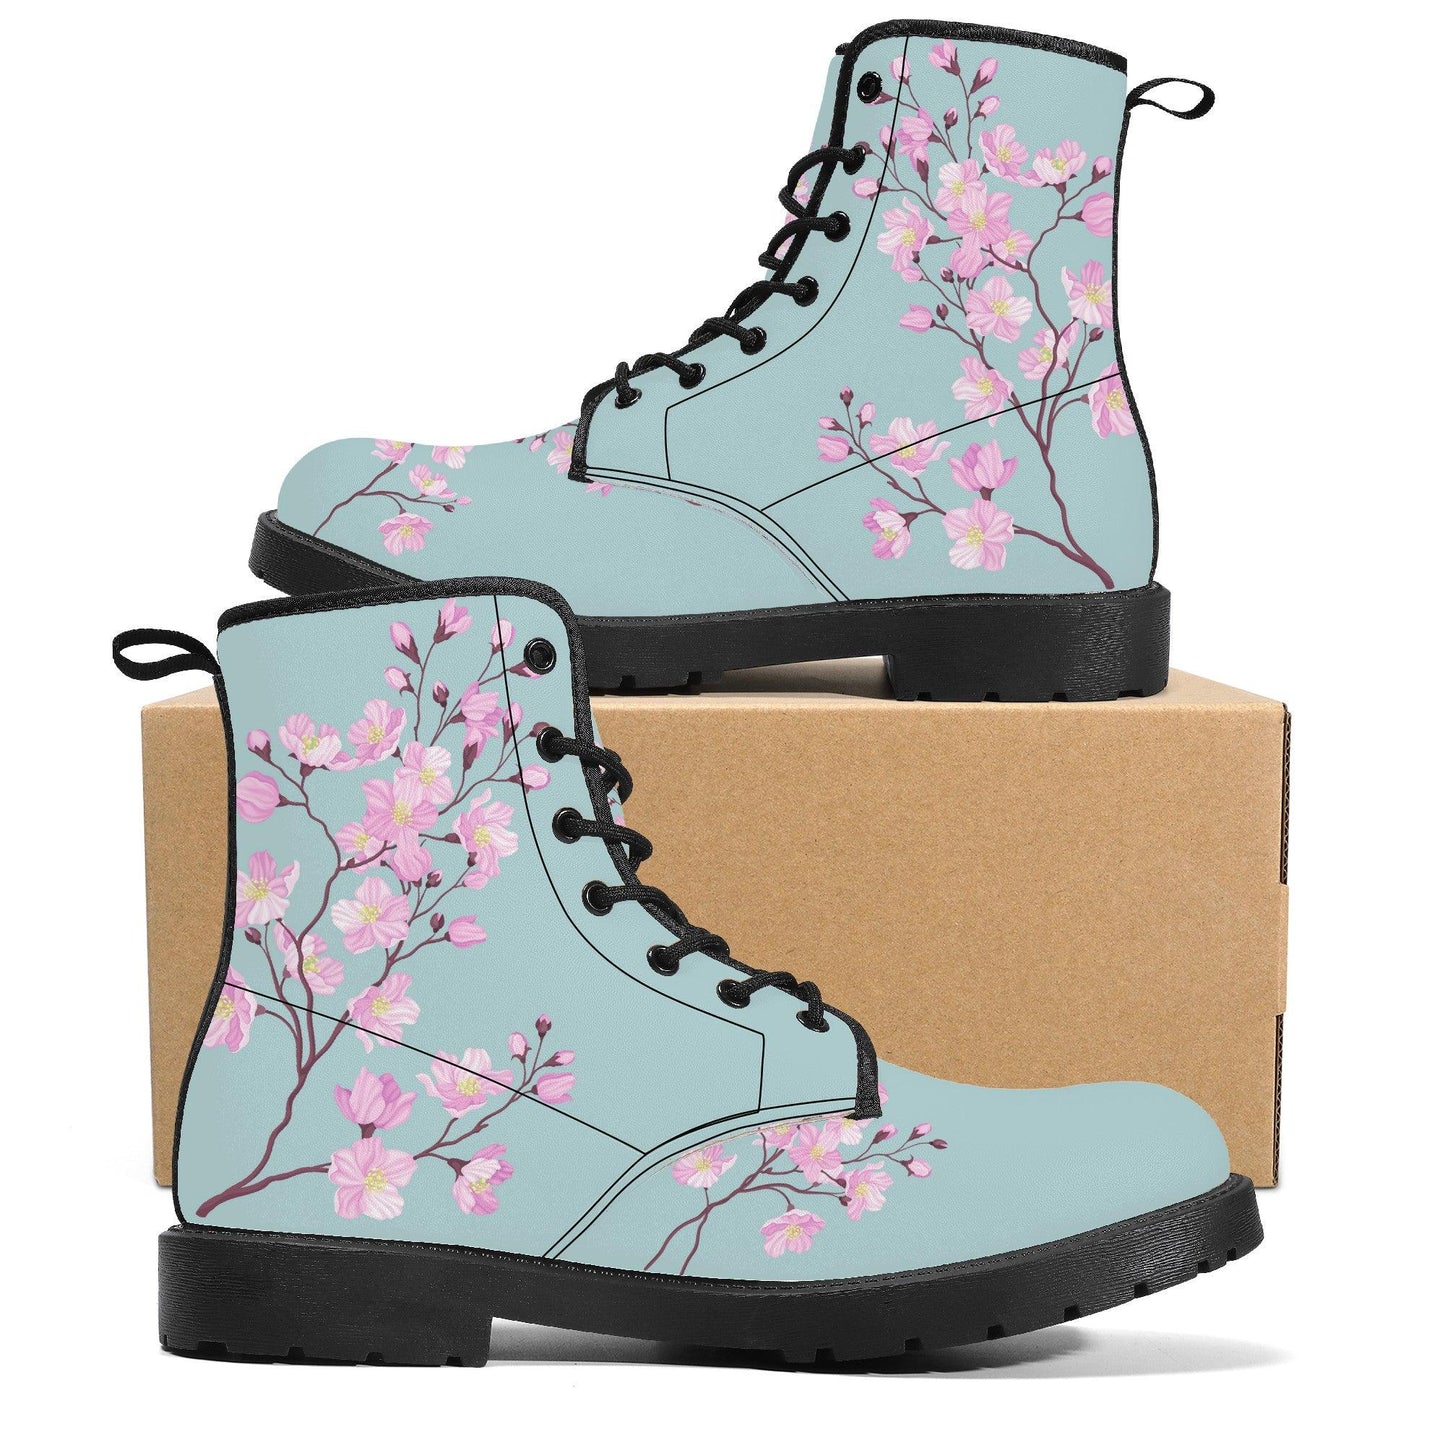 Sky Blue Vegan Leather Boots with Cherry Blossom